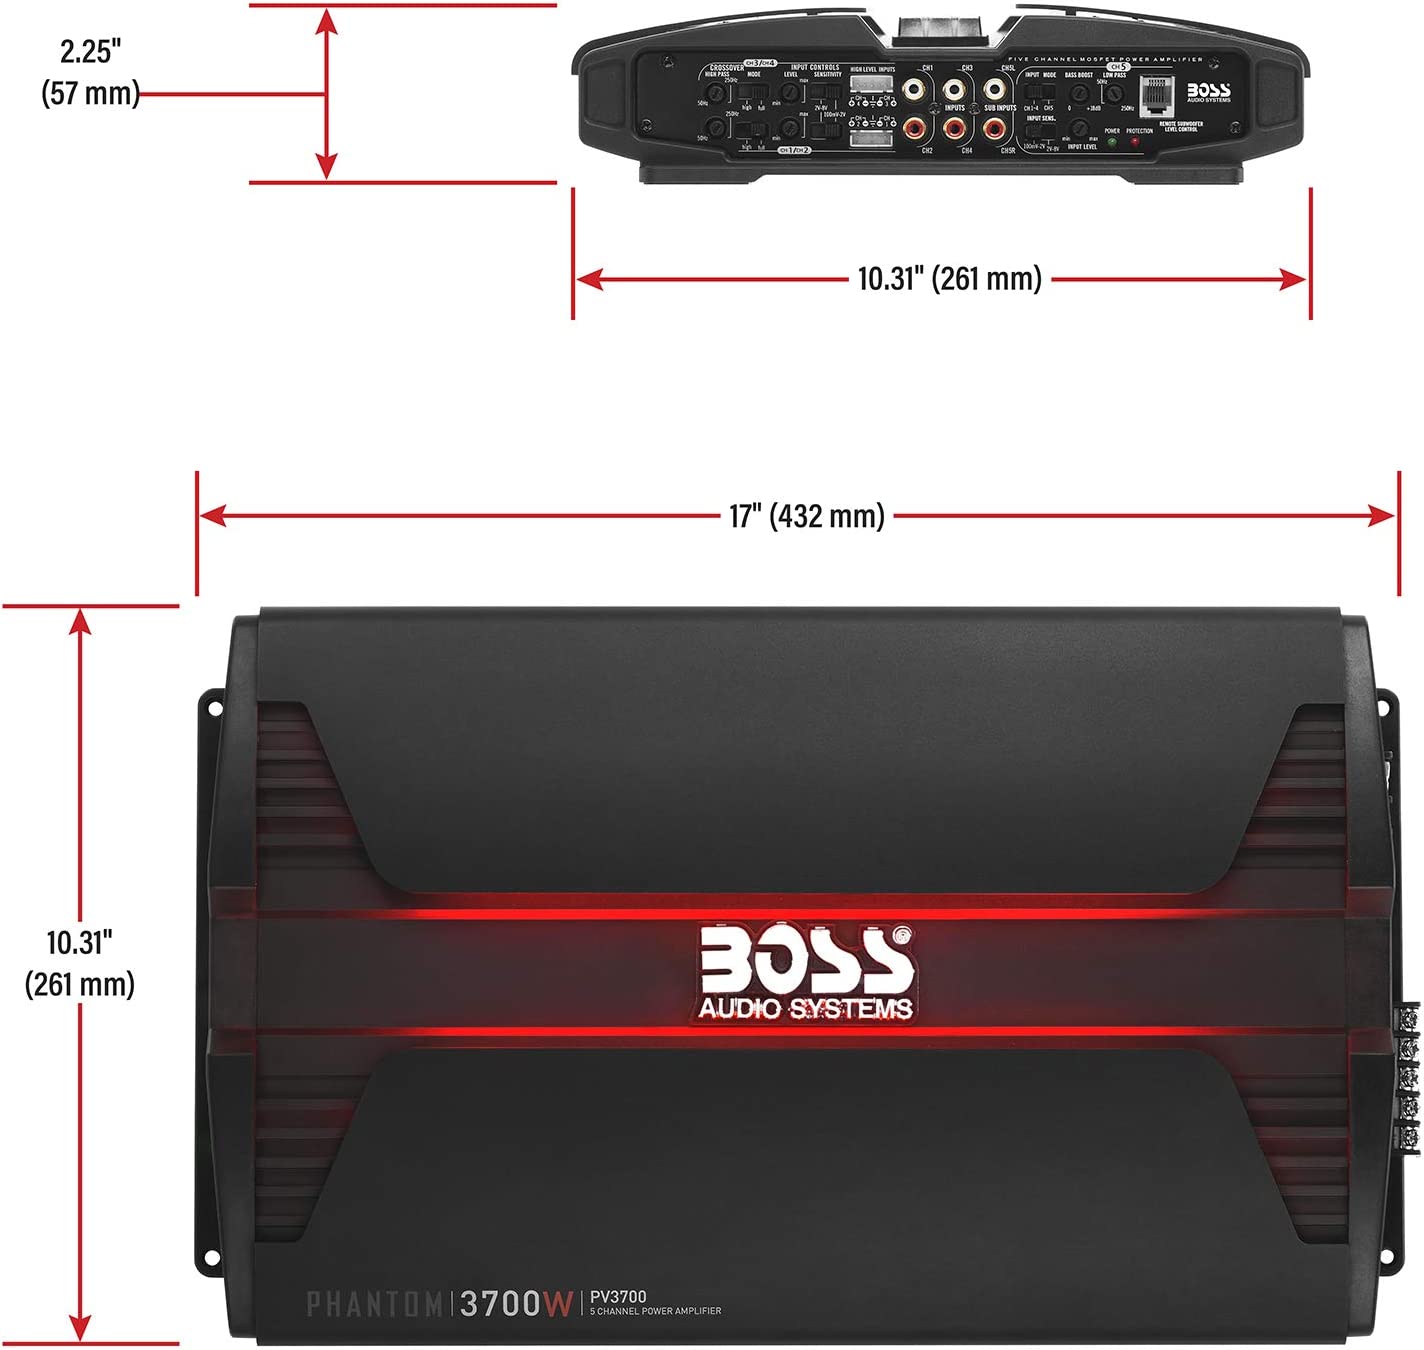 PV3700 5 Channel Car Stereo Amplifier – 3700 High Output, 5 Channel, 2/4 Ohm Stable, Low/High Level Inputs, High/Low Pass Crossover, Full Range, Bridgeable, for Subwoofer